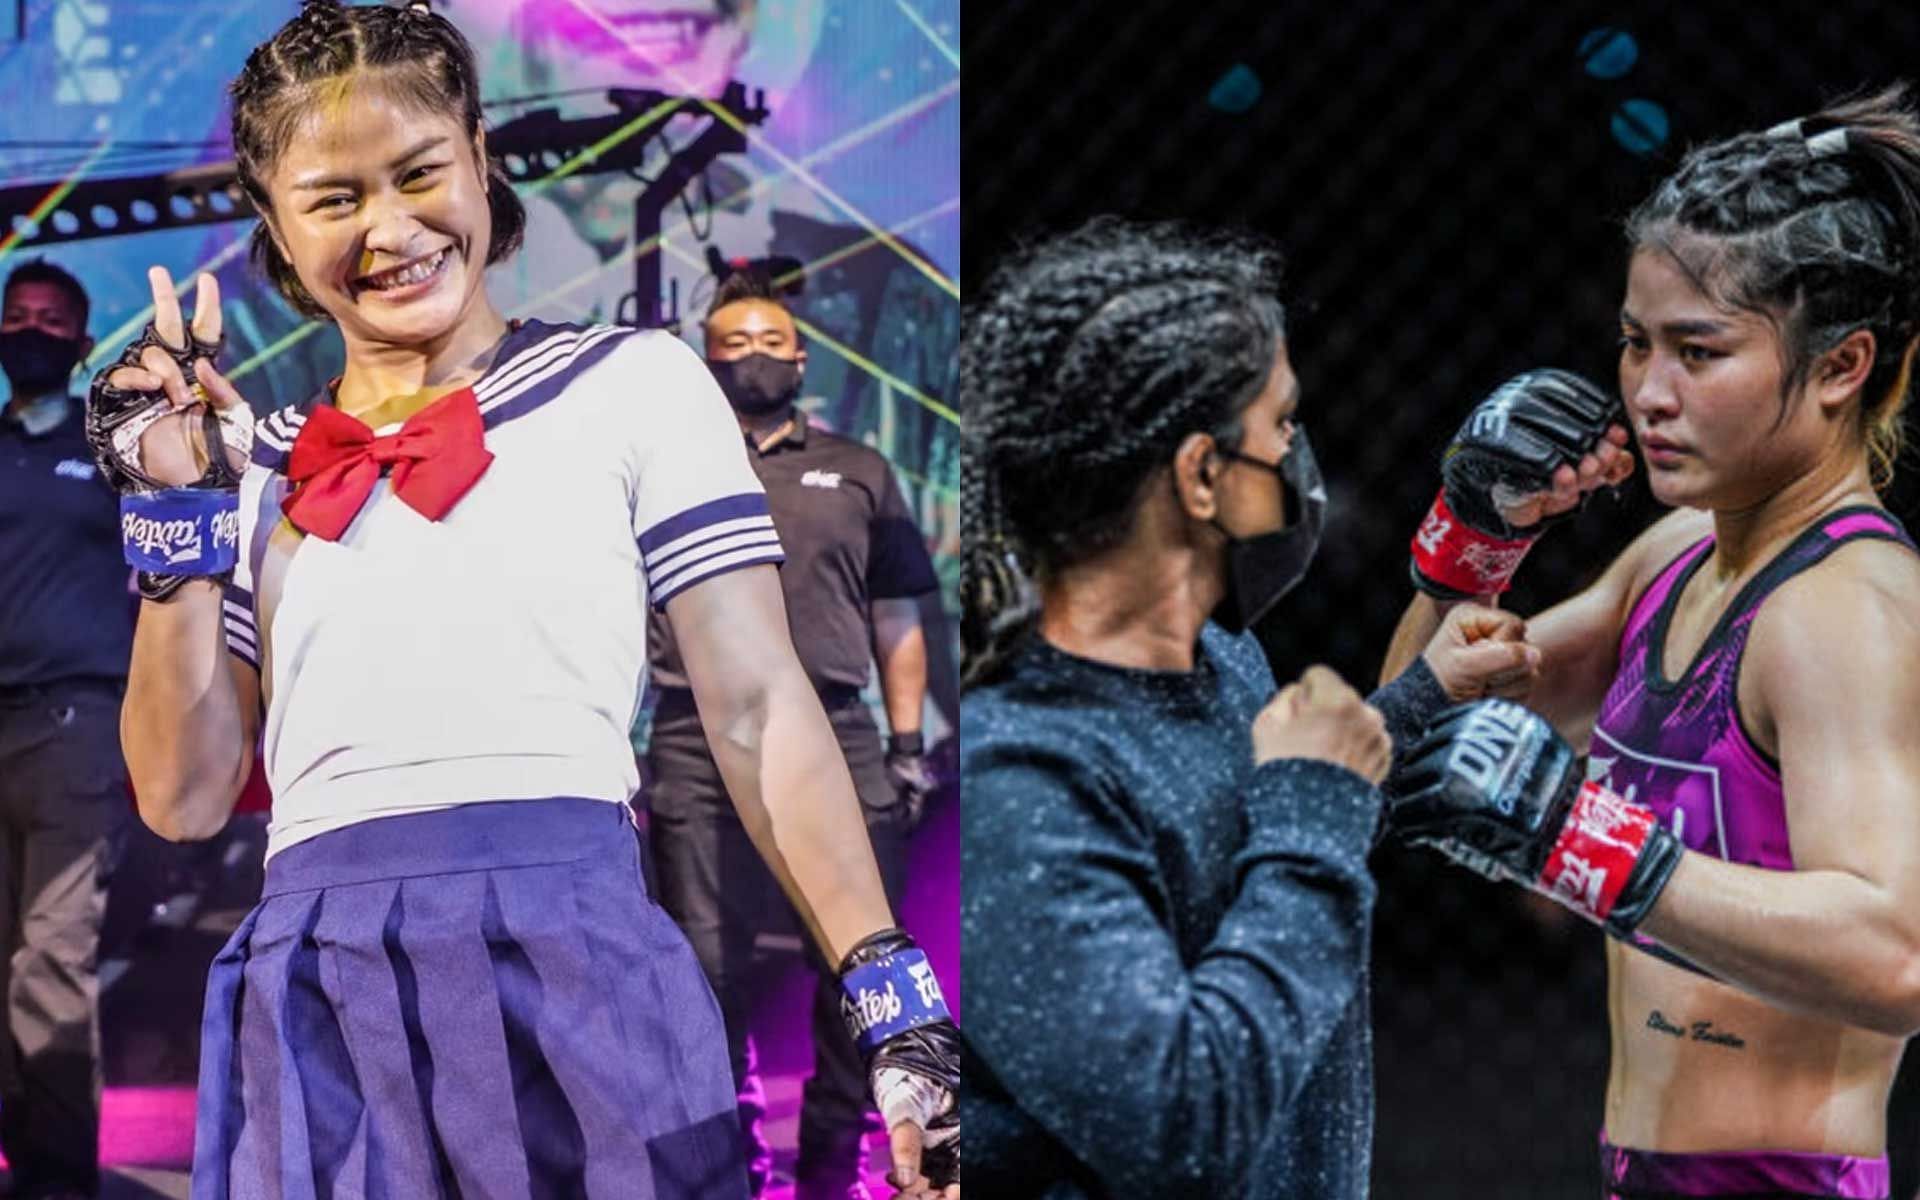 Stamp Fairtex (left) responds to Ritu Phogat, says she&#039;s not afraid at all of wrestling star [Photo courtesy of ONE Championship]